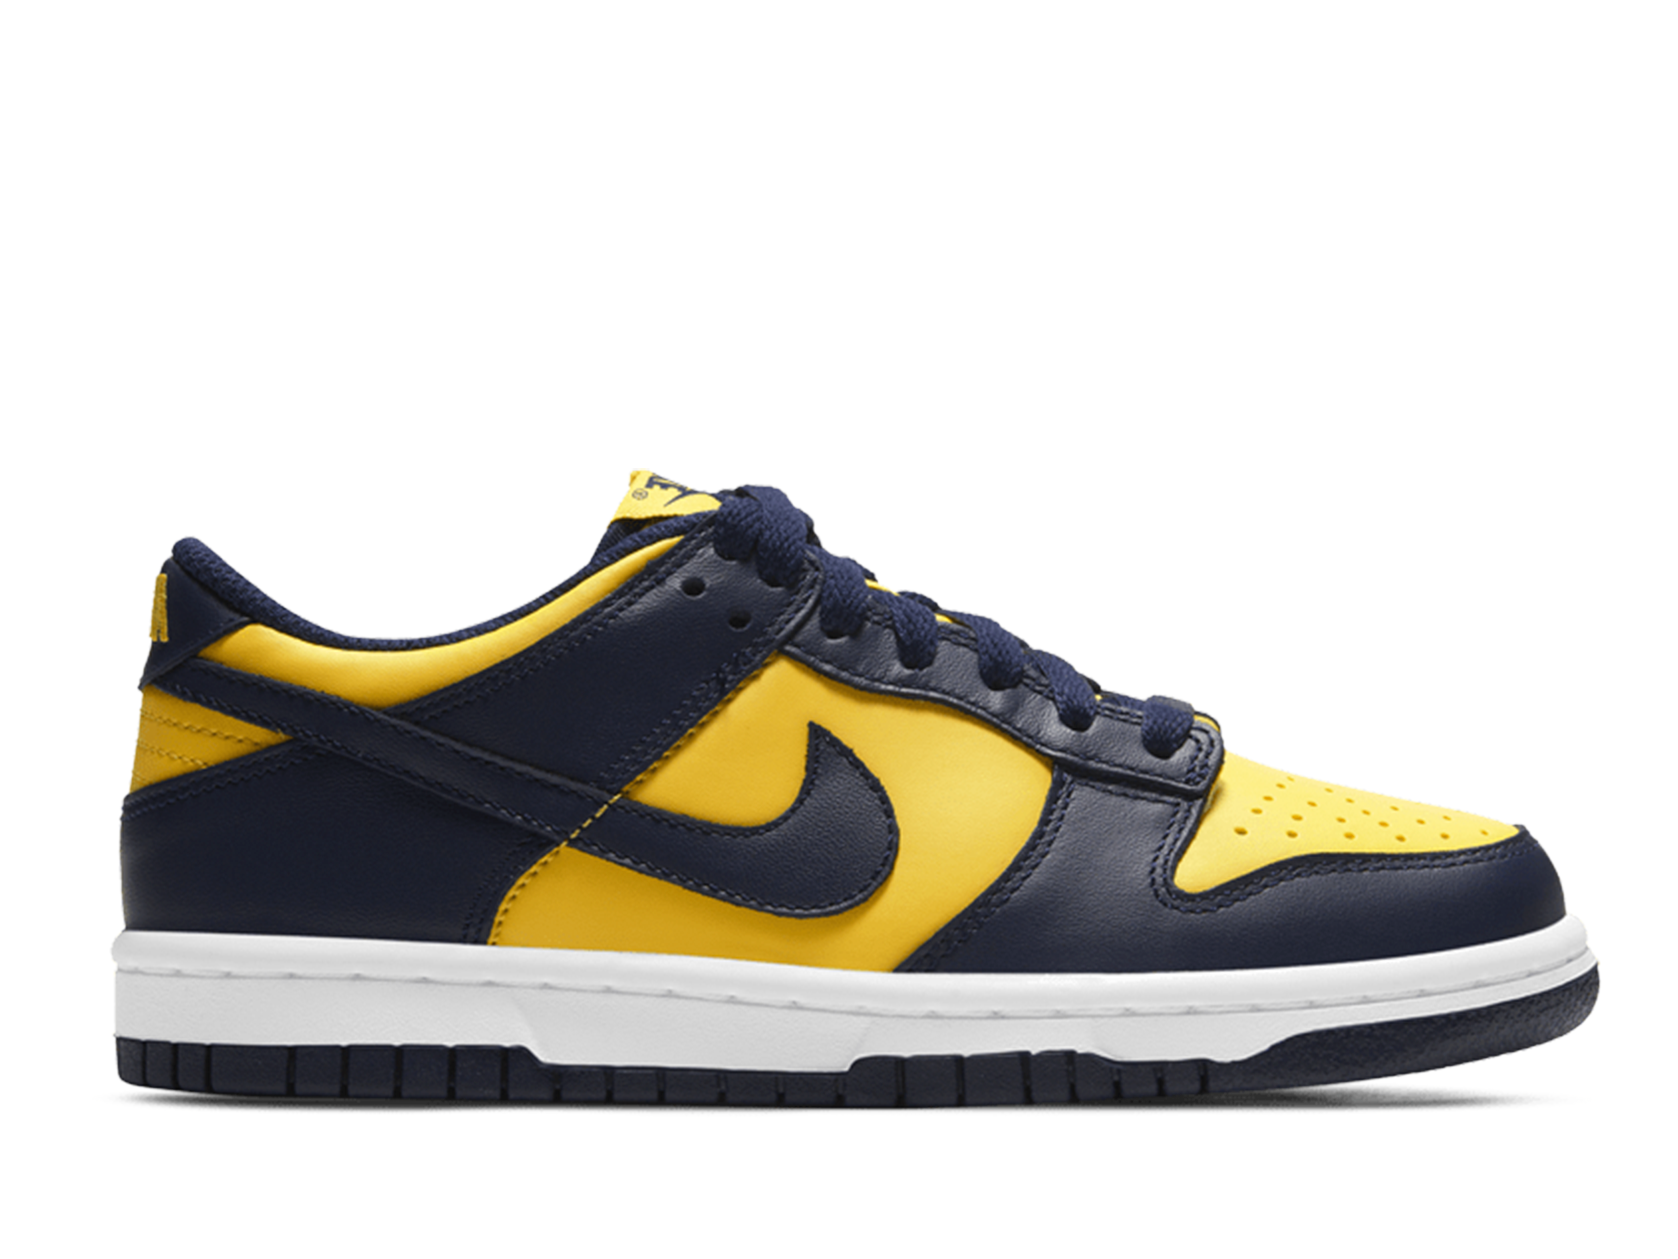 Double Boxed  234.99 Nike Dunk Low Michigan 2021 Double Boxed